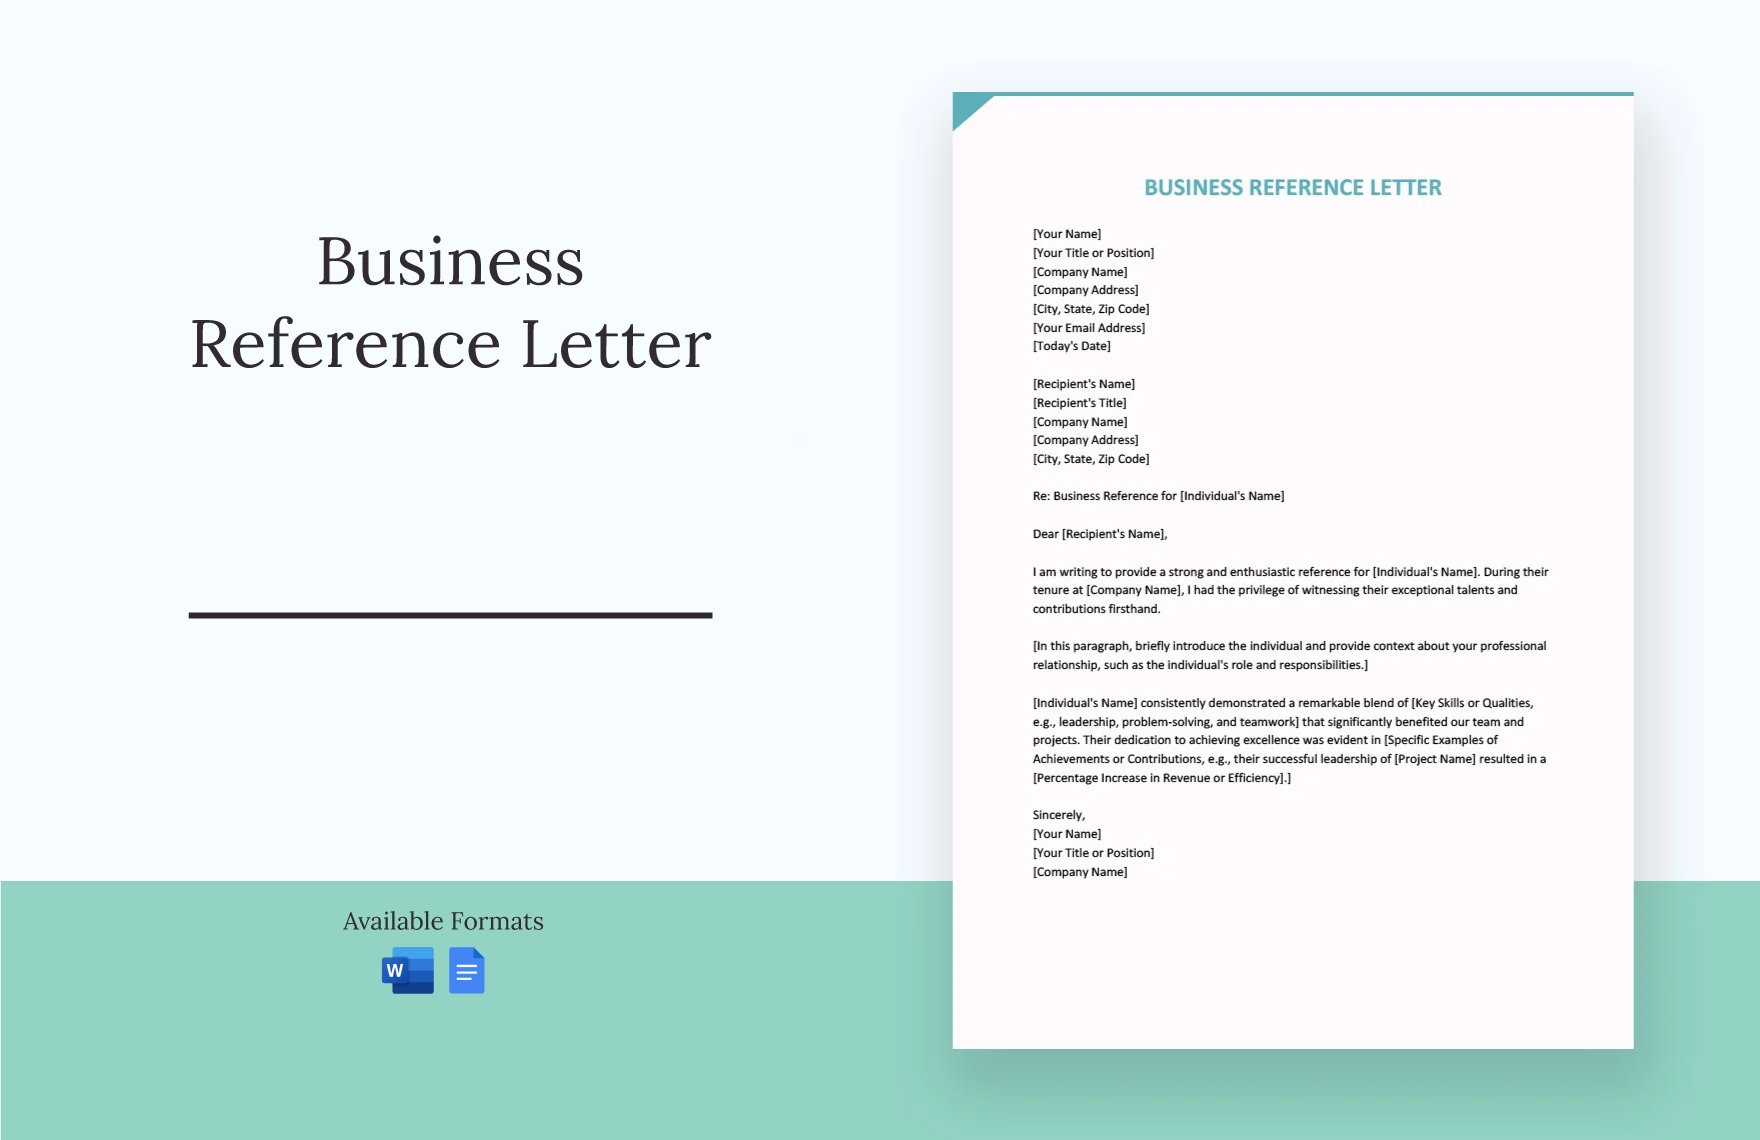 Business Reference Letter in Word, Google Docs